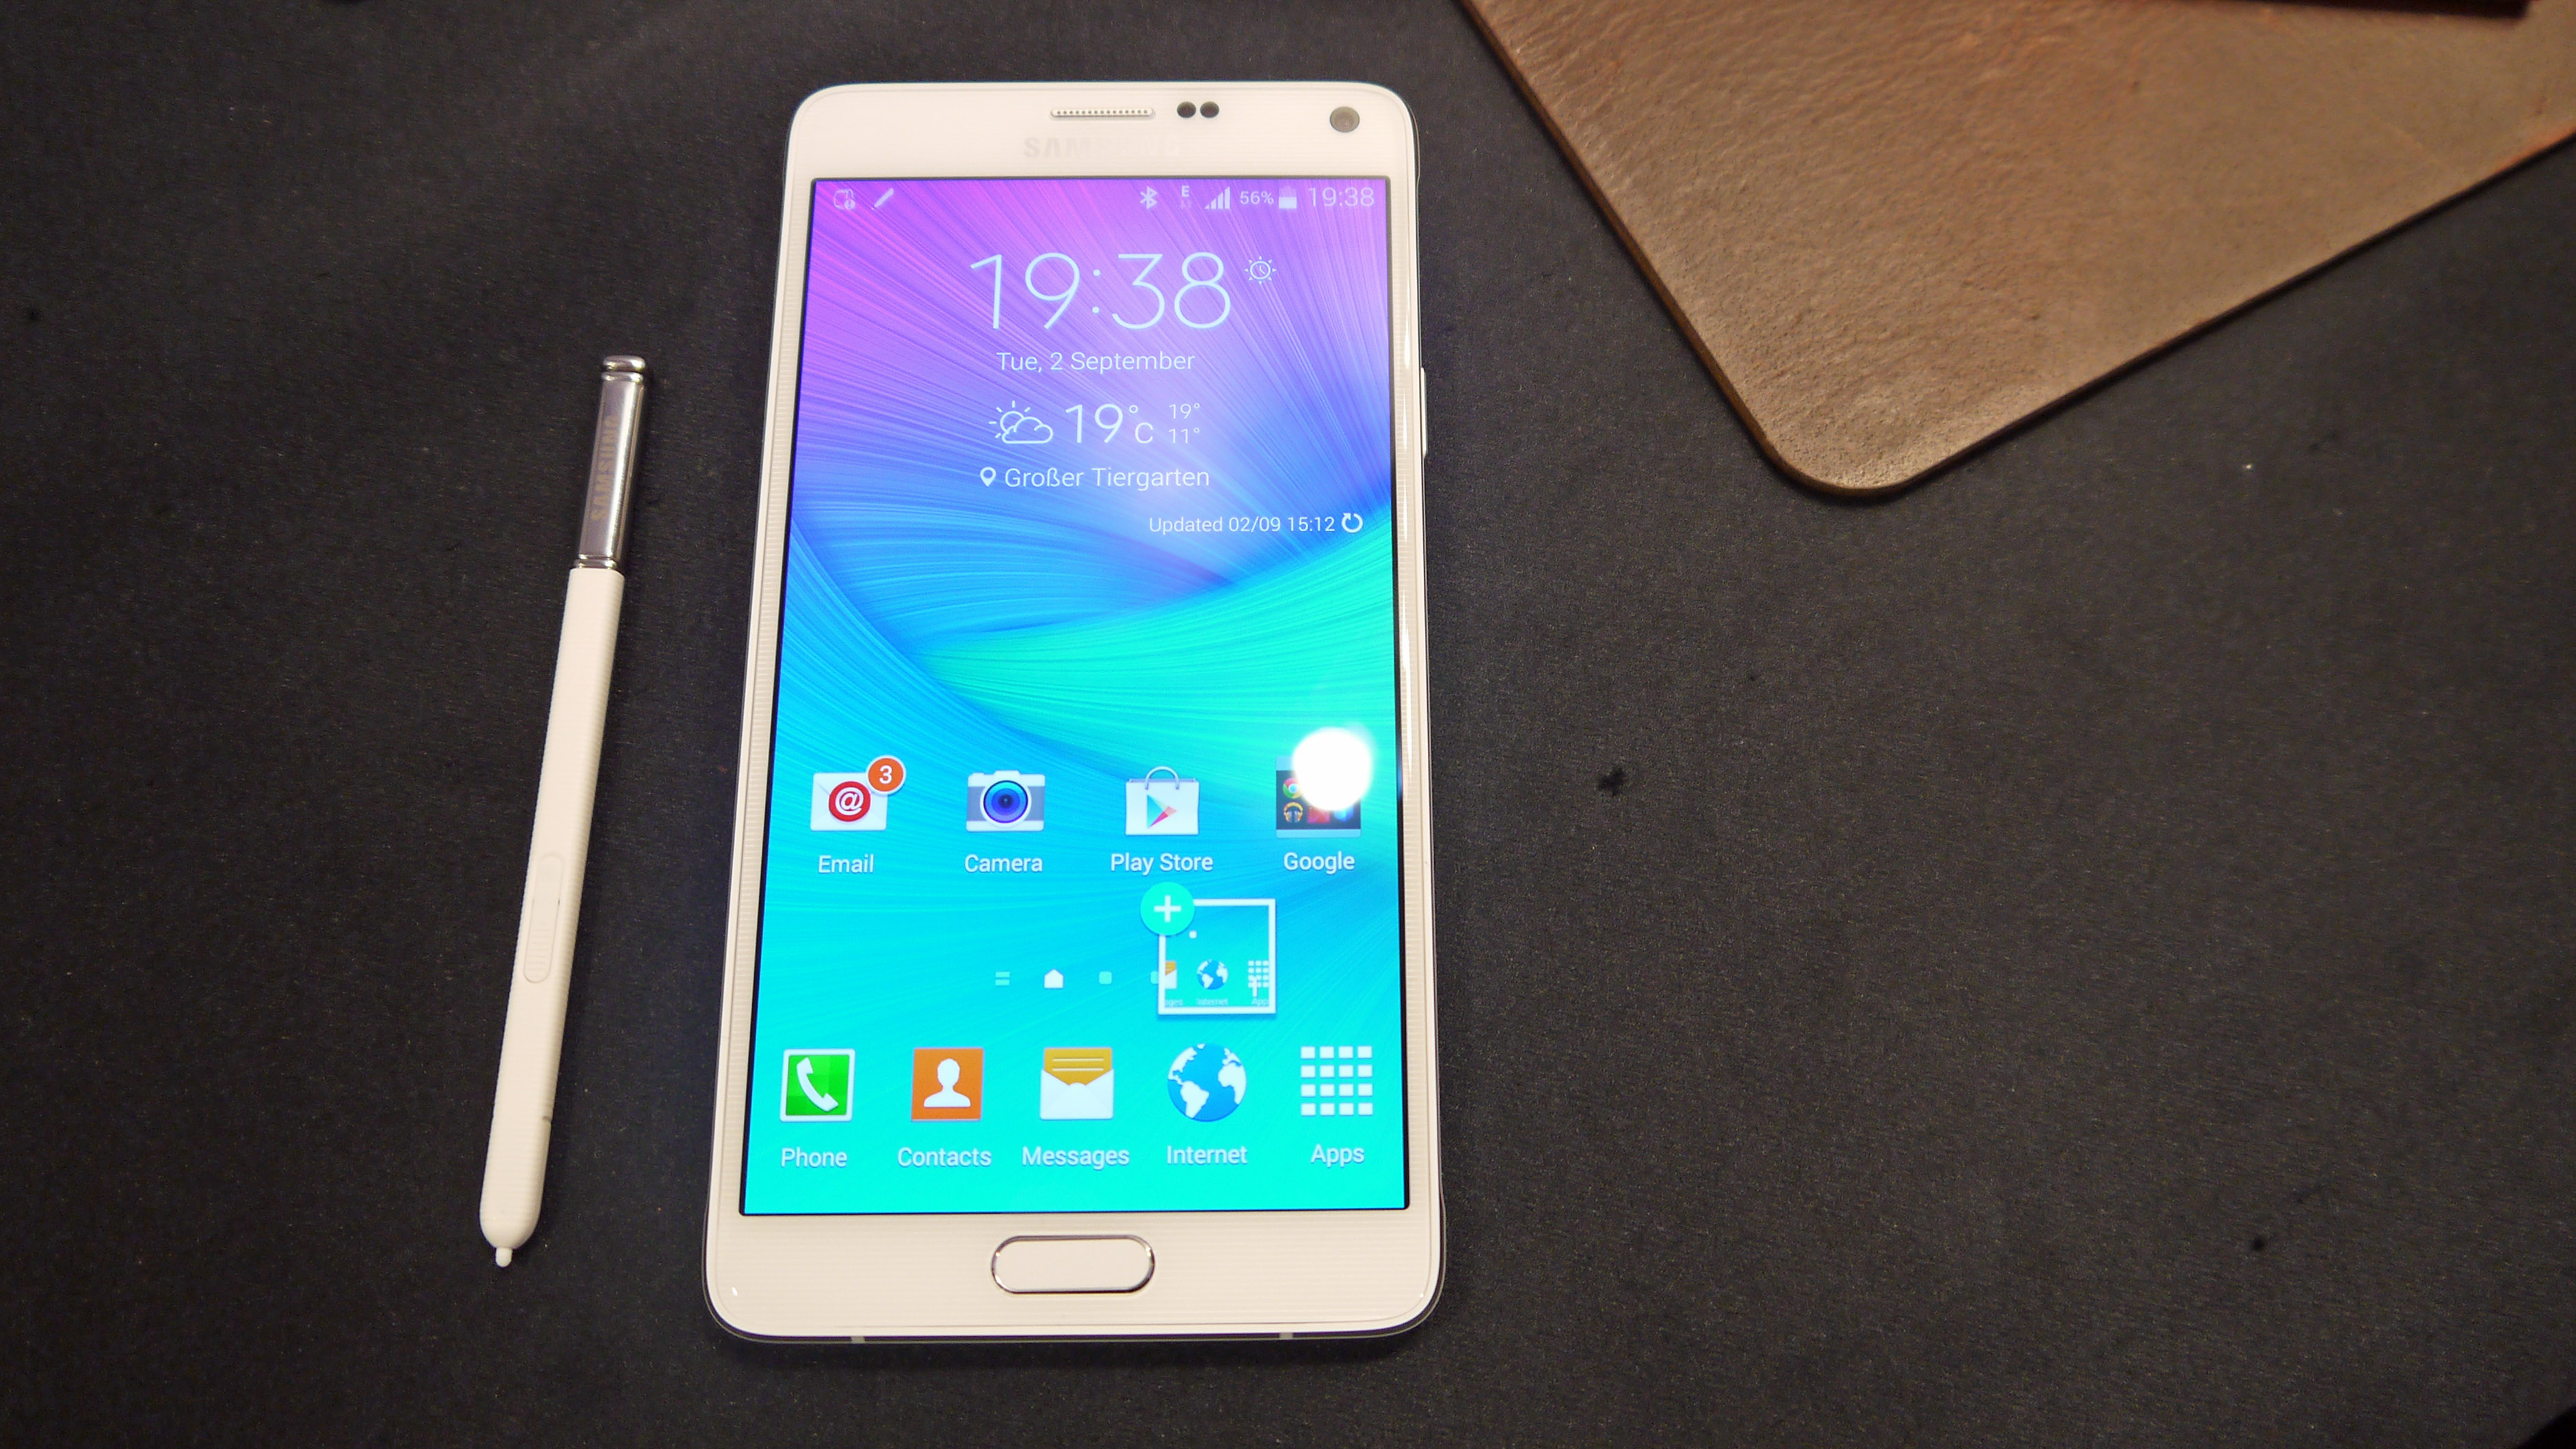 Samsung Note 4. Самсунг Note 4s. Нот 4 Эдж. Galaxy Note 4 Edge.